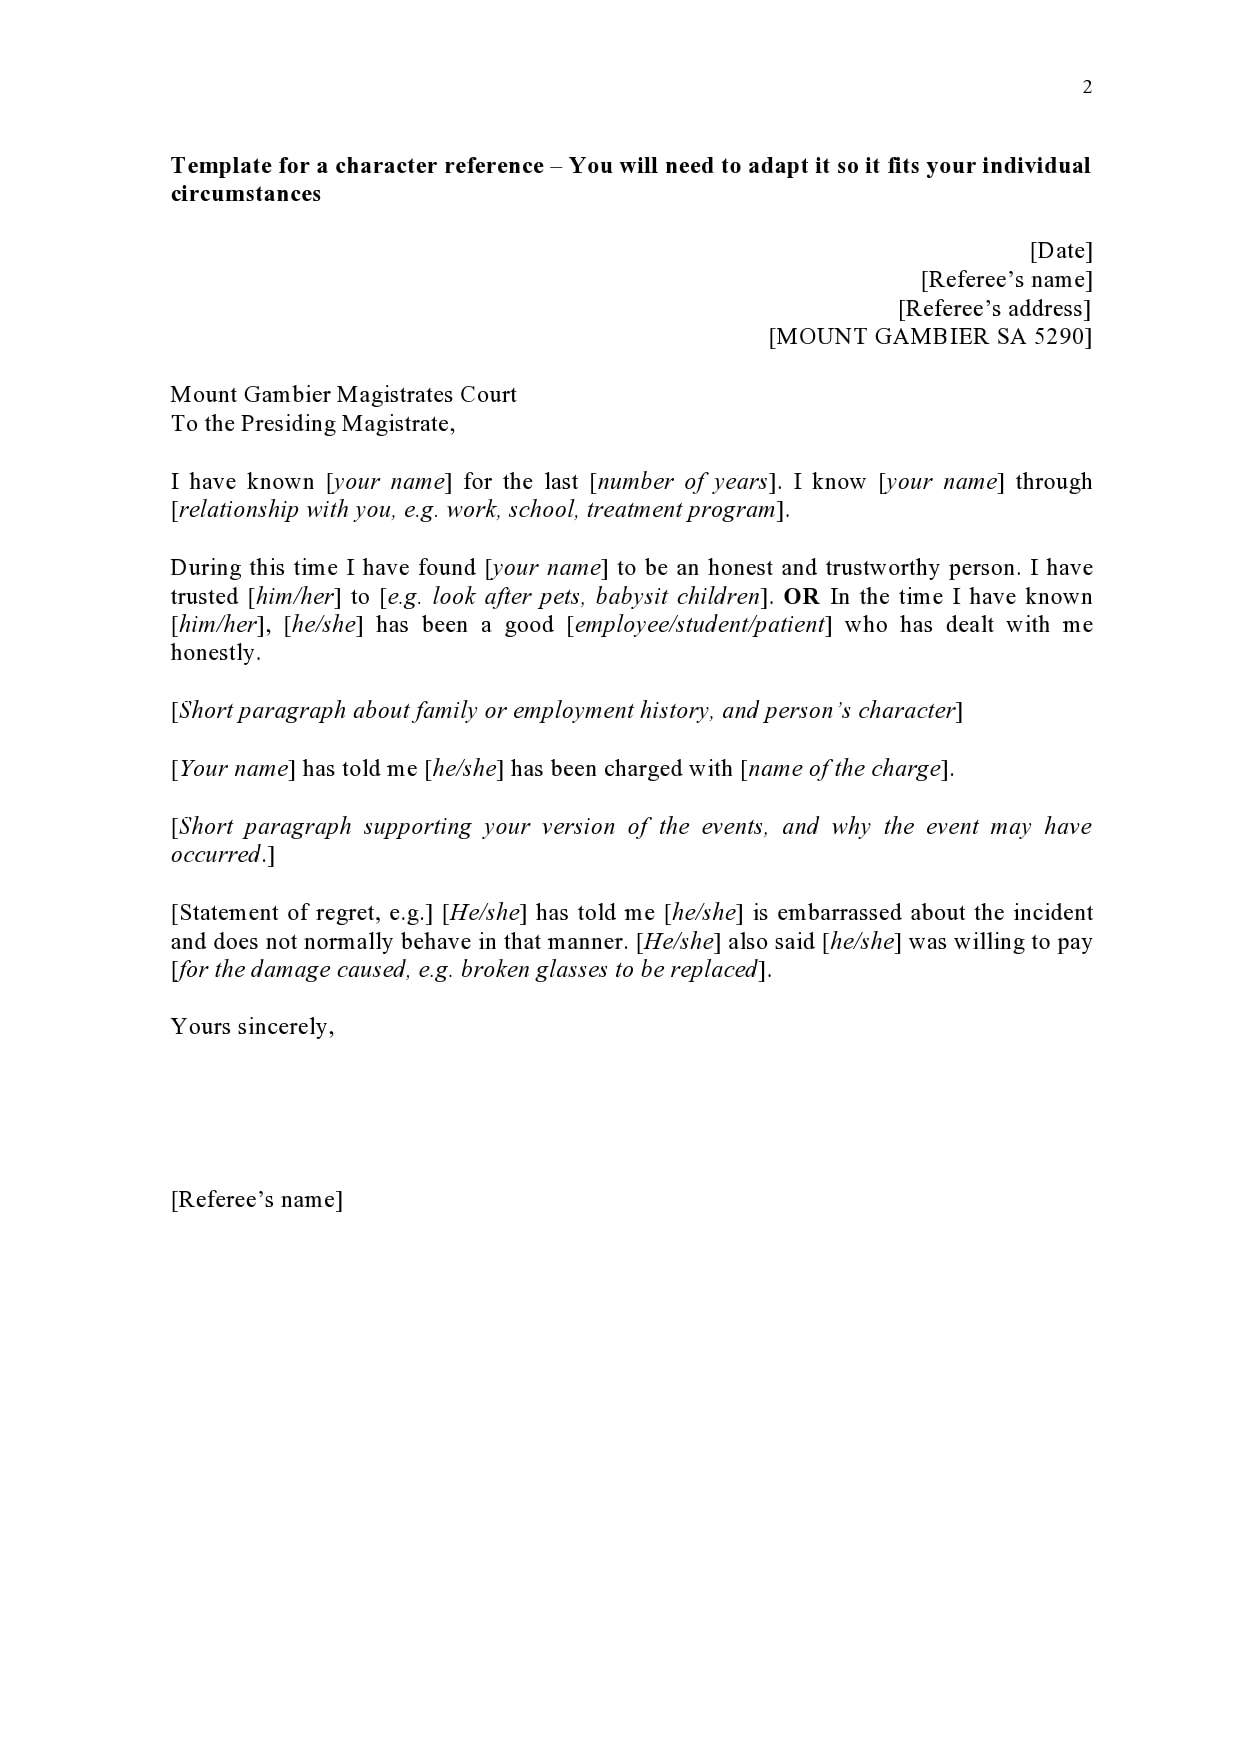 Sample Letter To Appear In Court from templatearchive.com